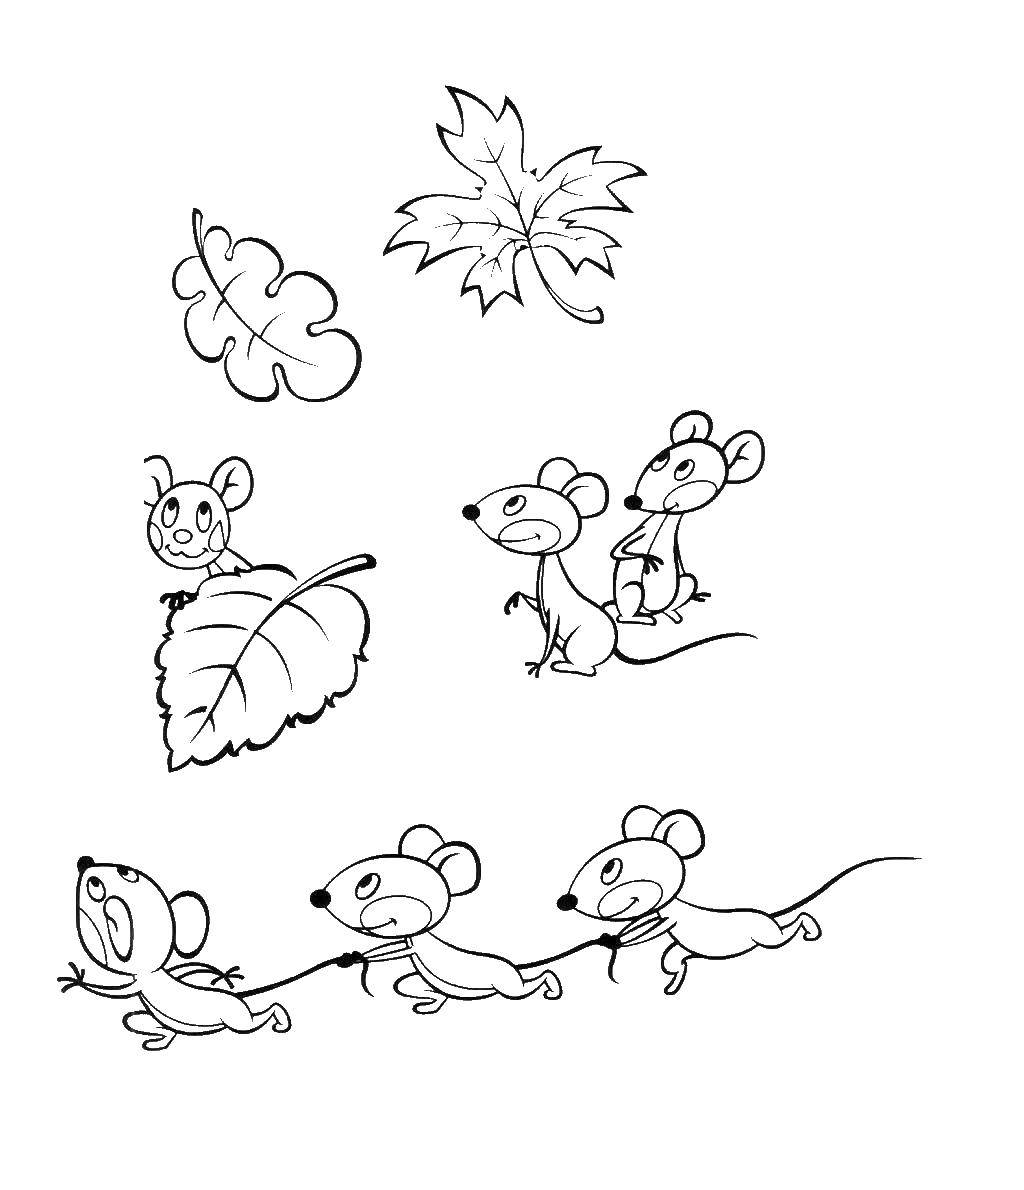 Coloring Mouse. Category rodents . Tags:  mouse.